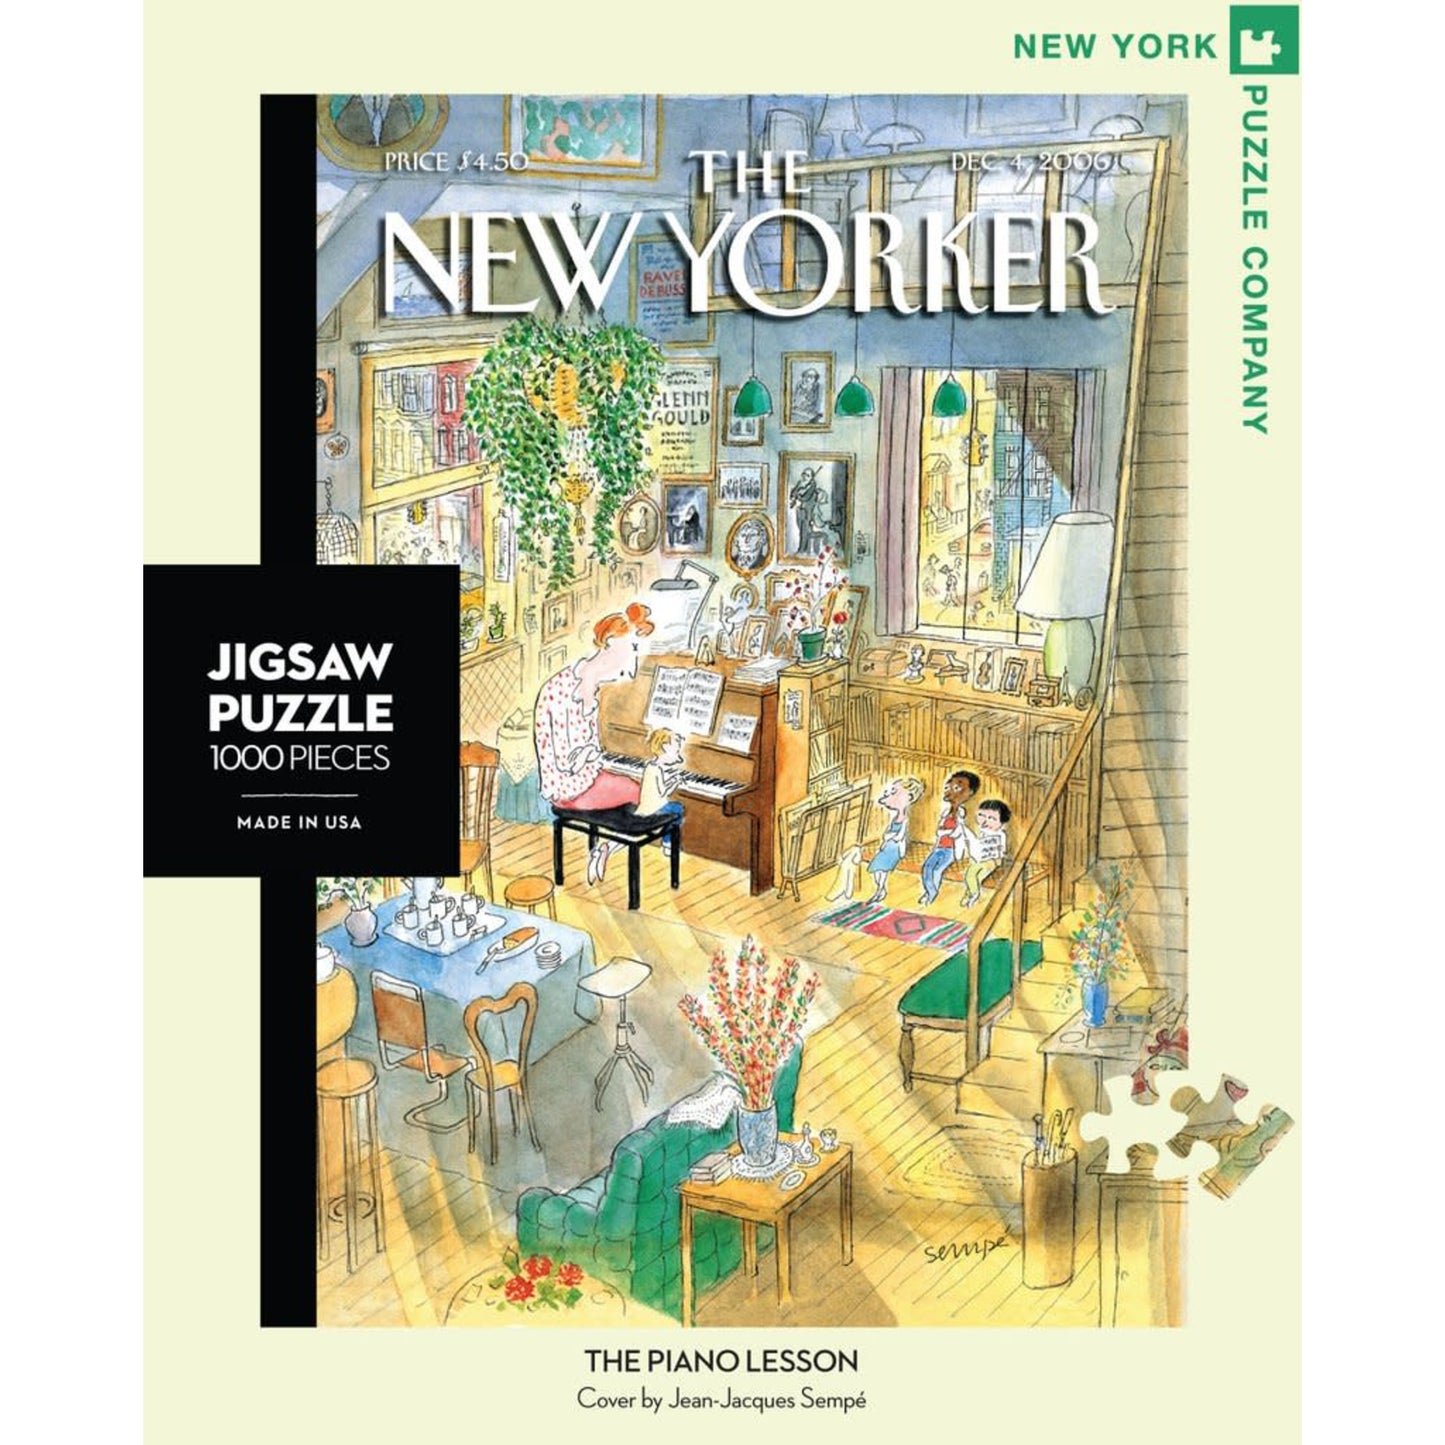 The New Yorker, The Piano Lesson Puzzle